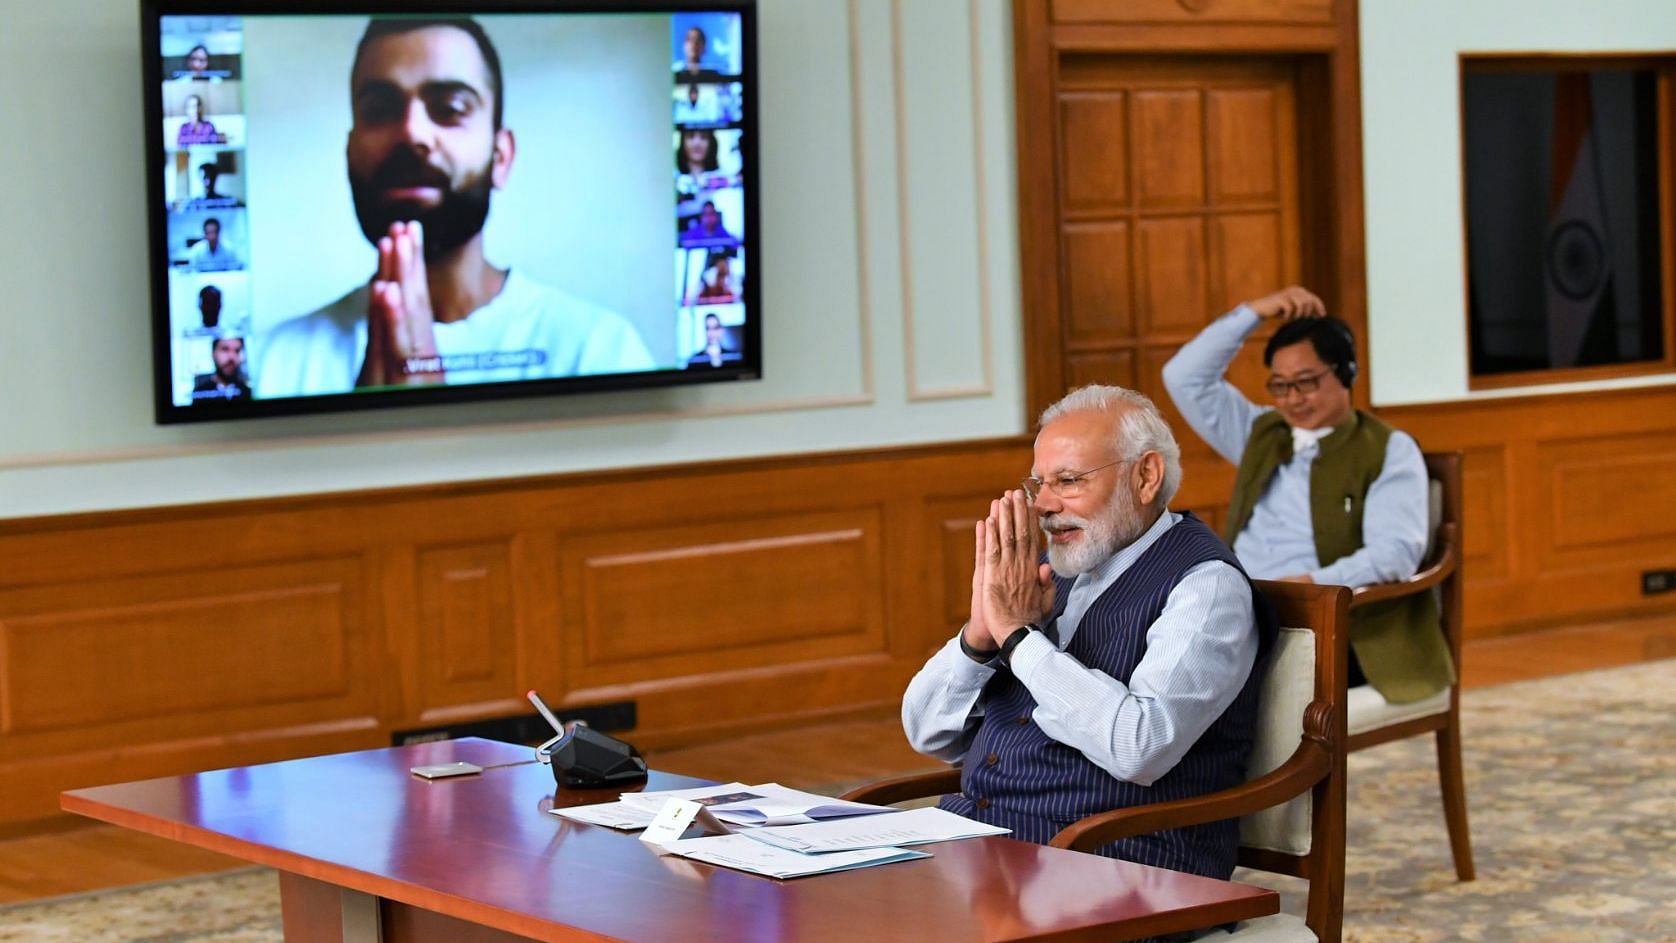 Prime Minister Narendra Modi spoke to Indian sportspersons asking them to help in the fight against coronavirus.